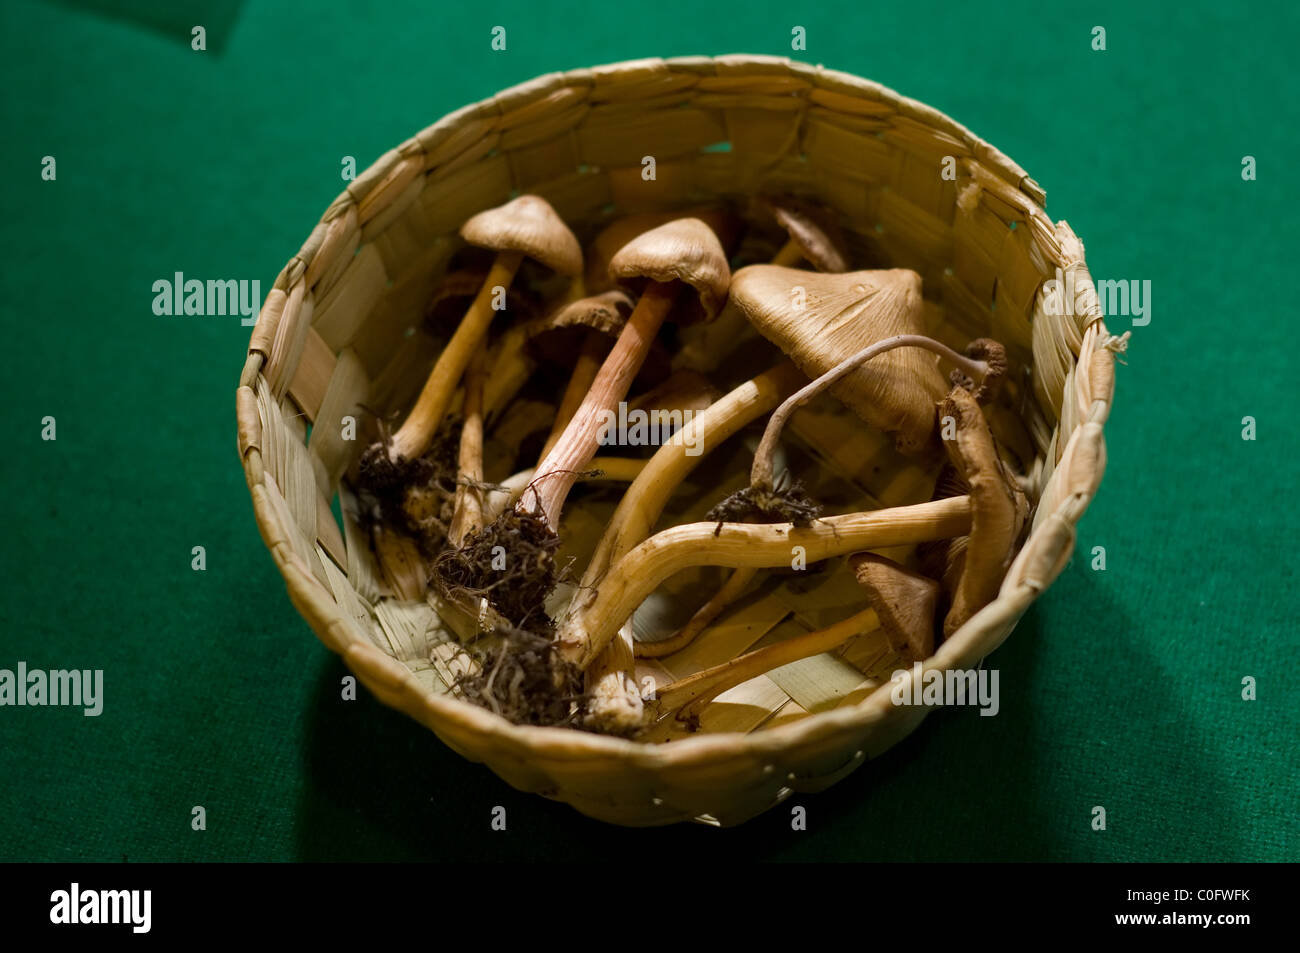 Inocybe mushrooms from Mexico in a basket Stock Photo